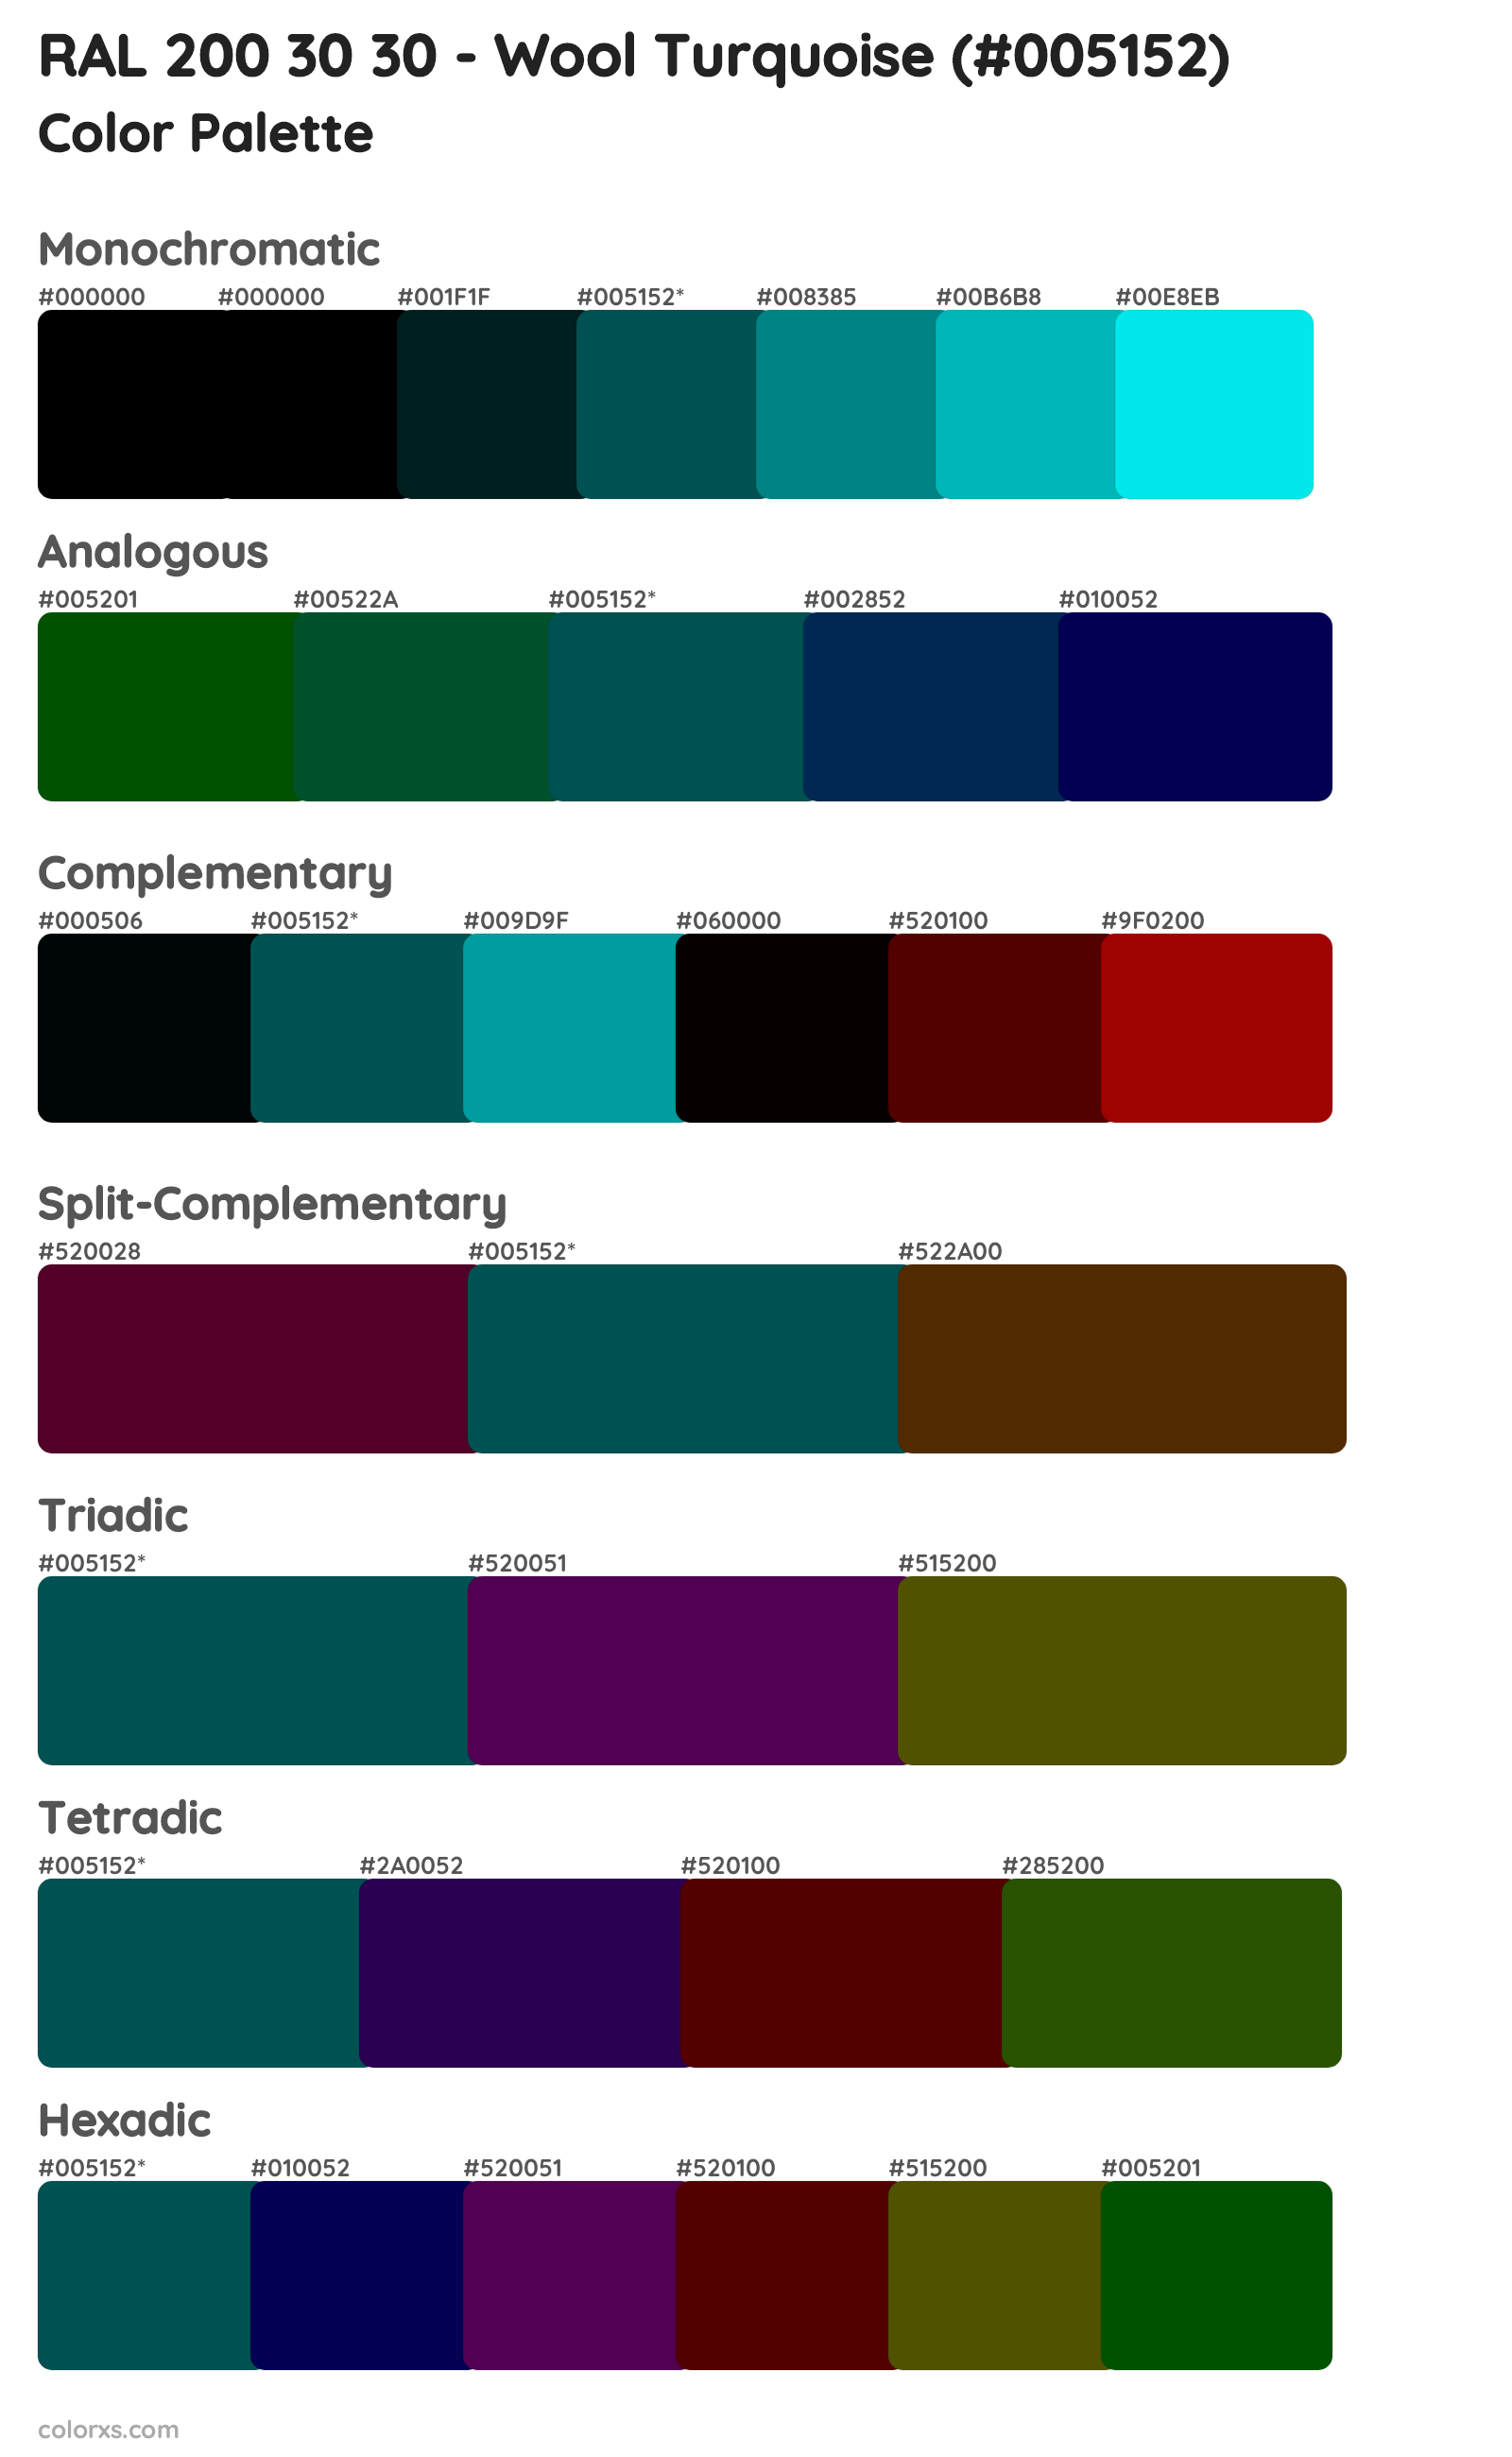 RAL 200 30 30 - Wool Turquoise Color Scheme Palettes